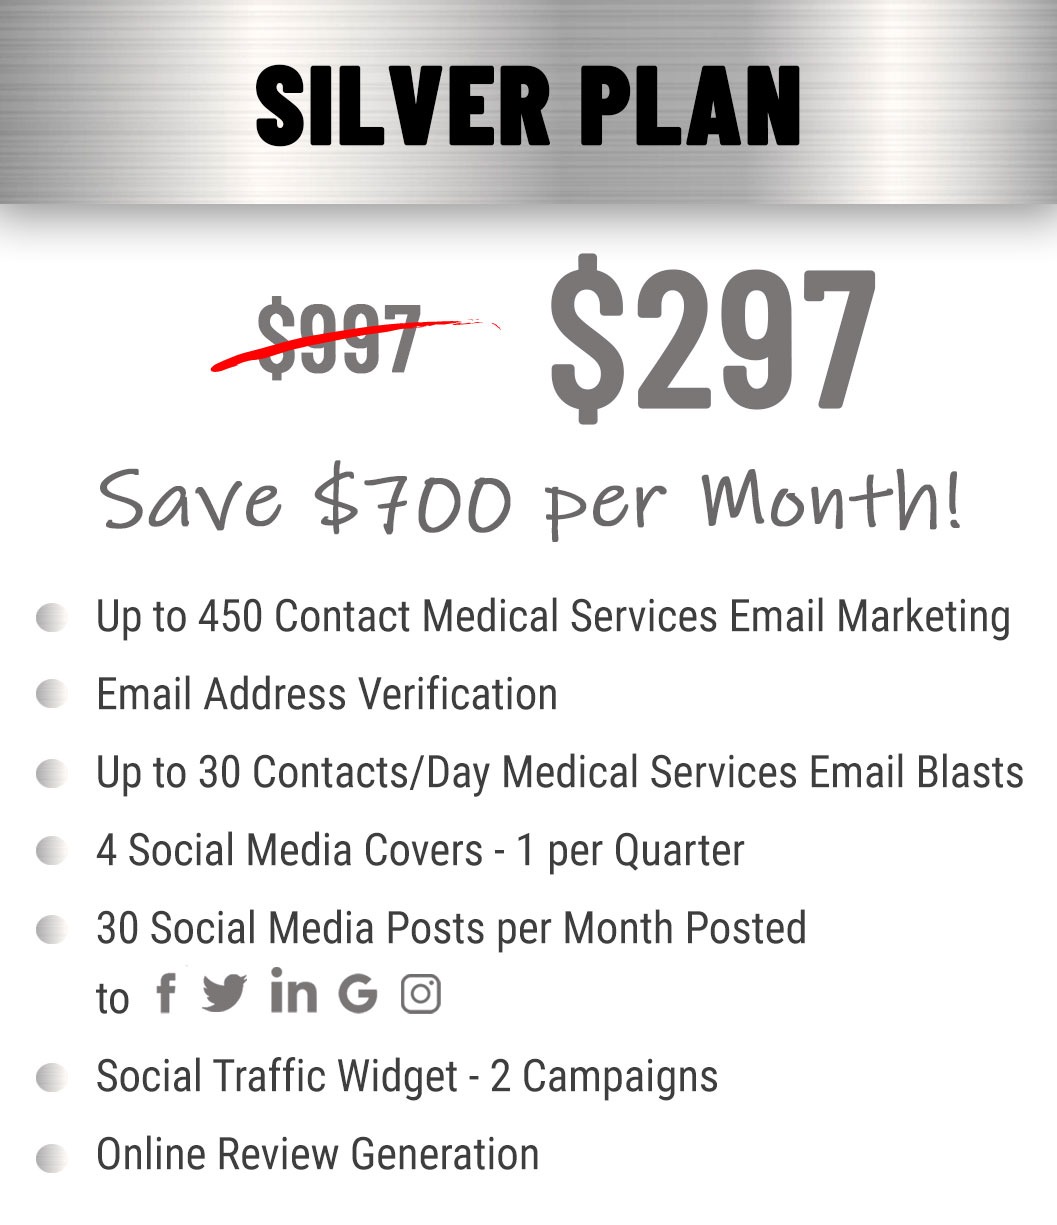 Silver Plan Pricing and Features MEDICAL SERVICES